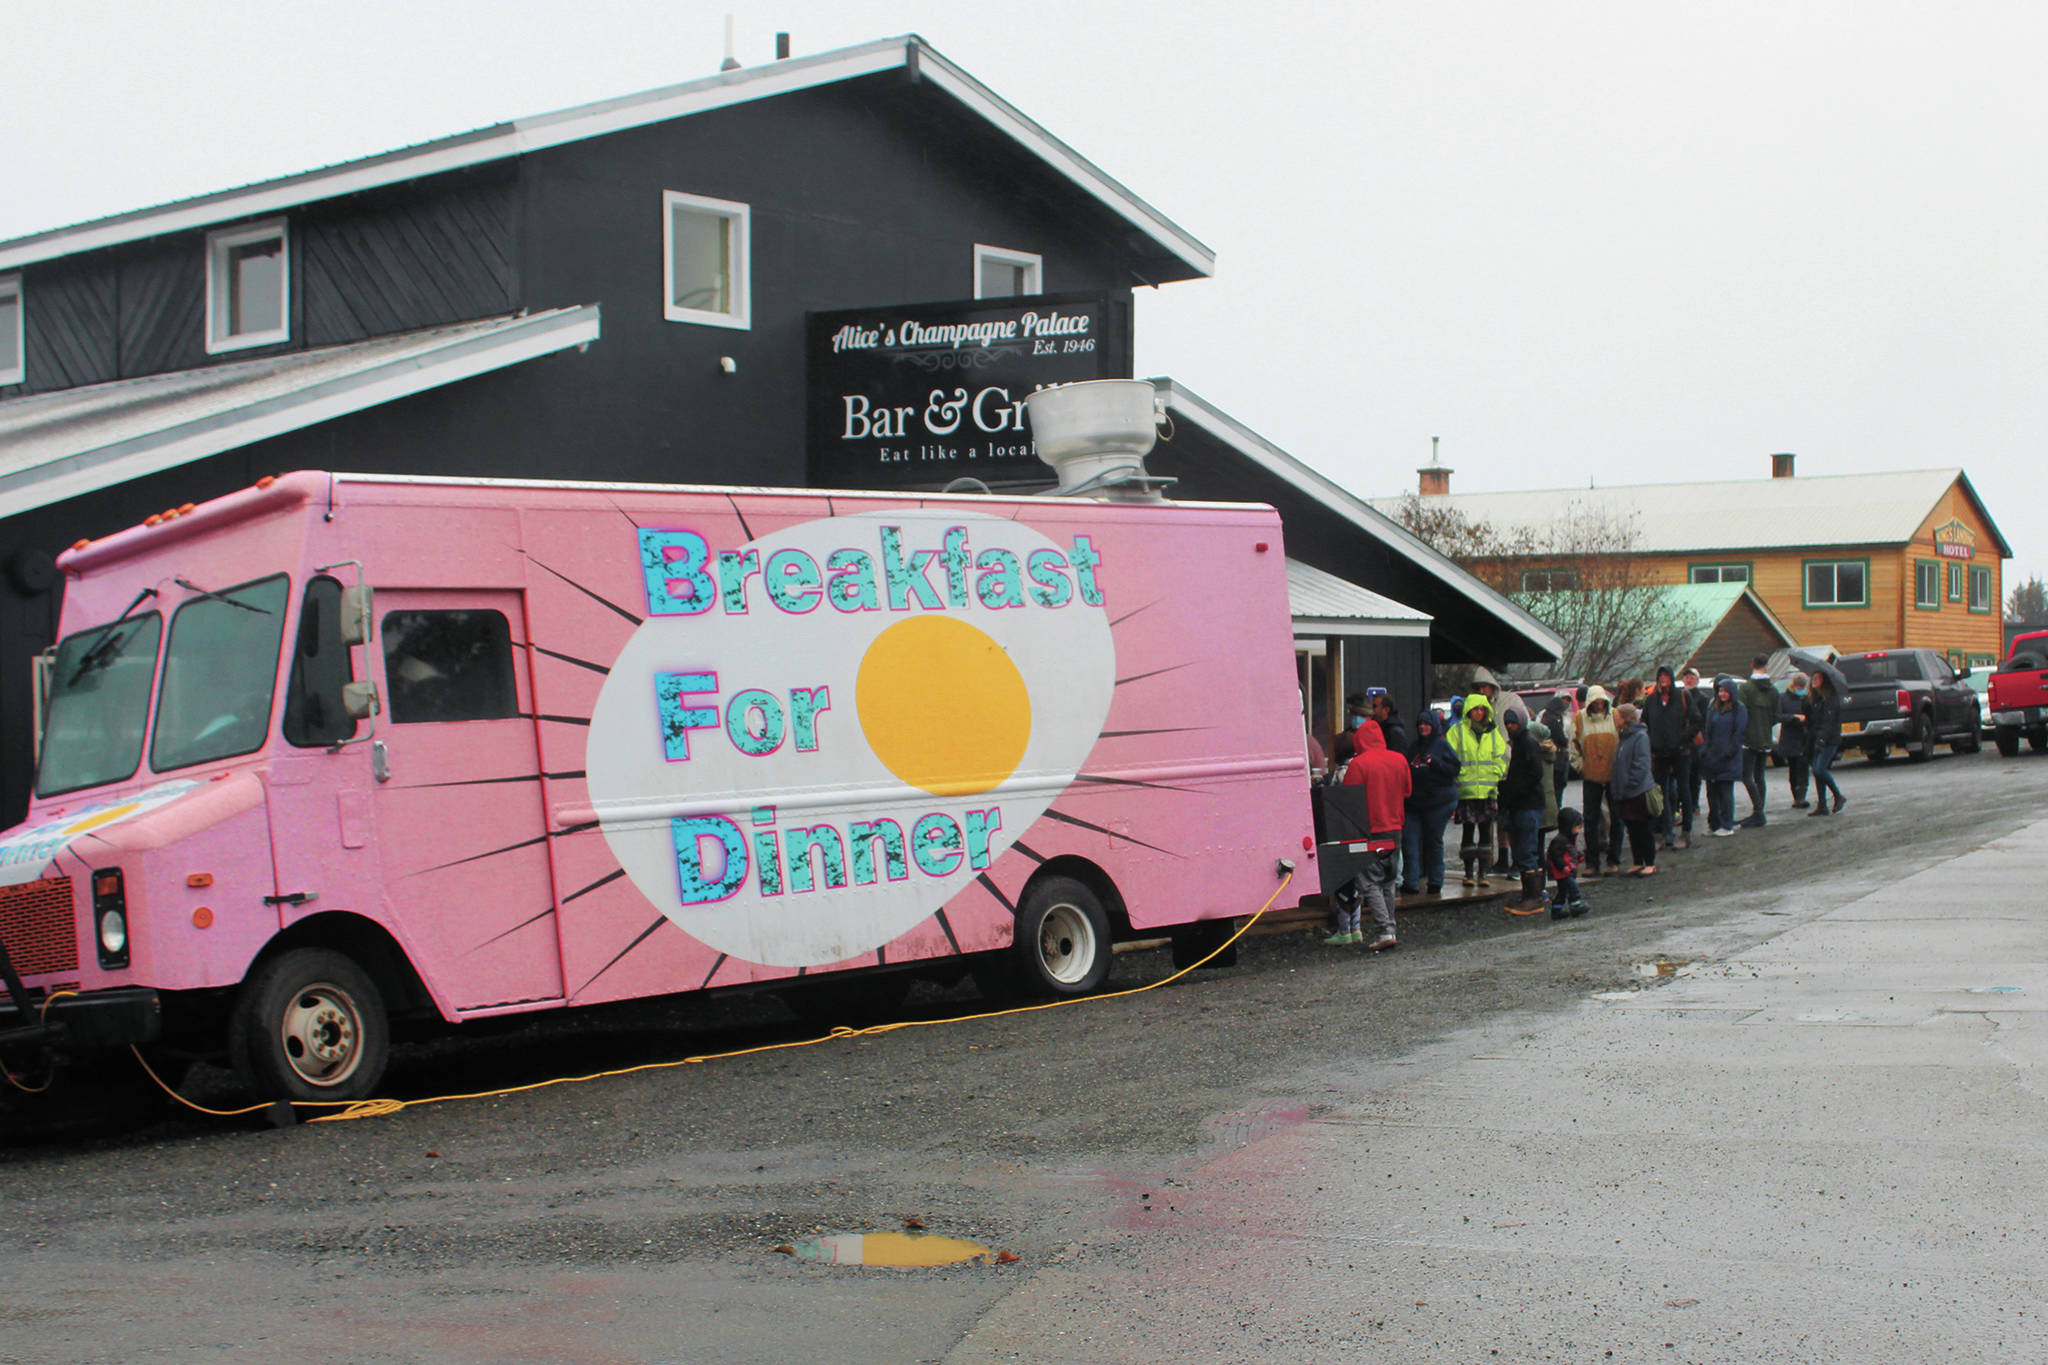 Locals wait in line to eat from the BFDfoodtruck (breakfast for dinner) on Sunday, Nov. 8, 2020 at Alice’s Champagne Palace in Homer, Alaska. The food truck was in town along with four others as part of the Food Network show “The Great Food Truck Race.” (Photo by Megan Pacer/Homer News)